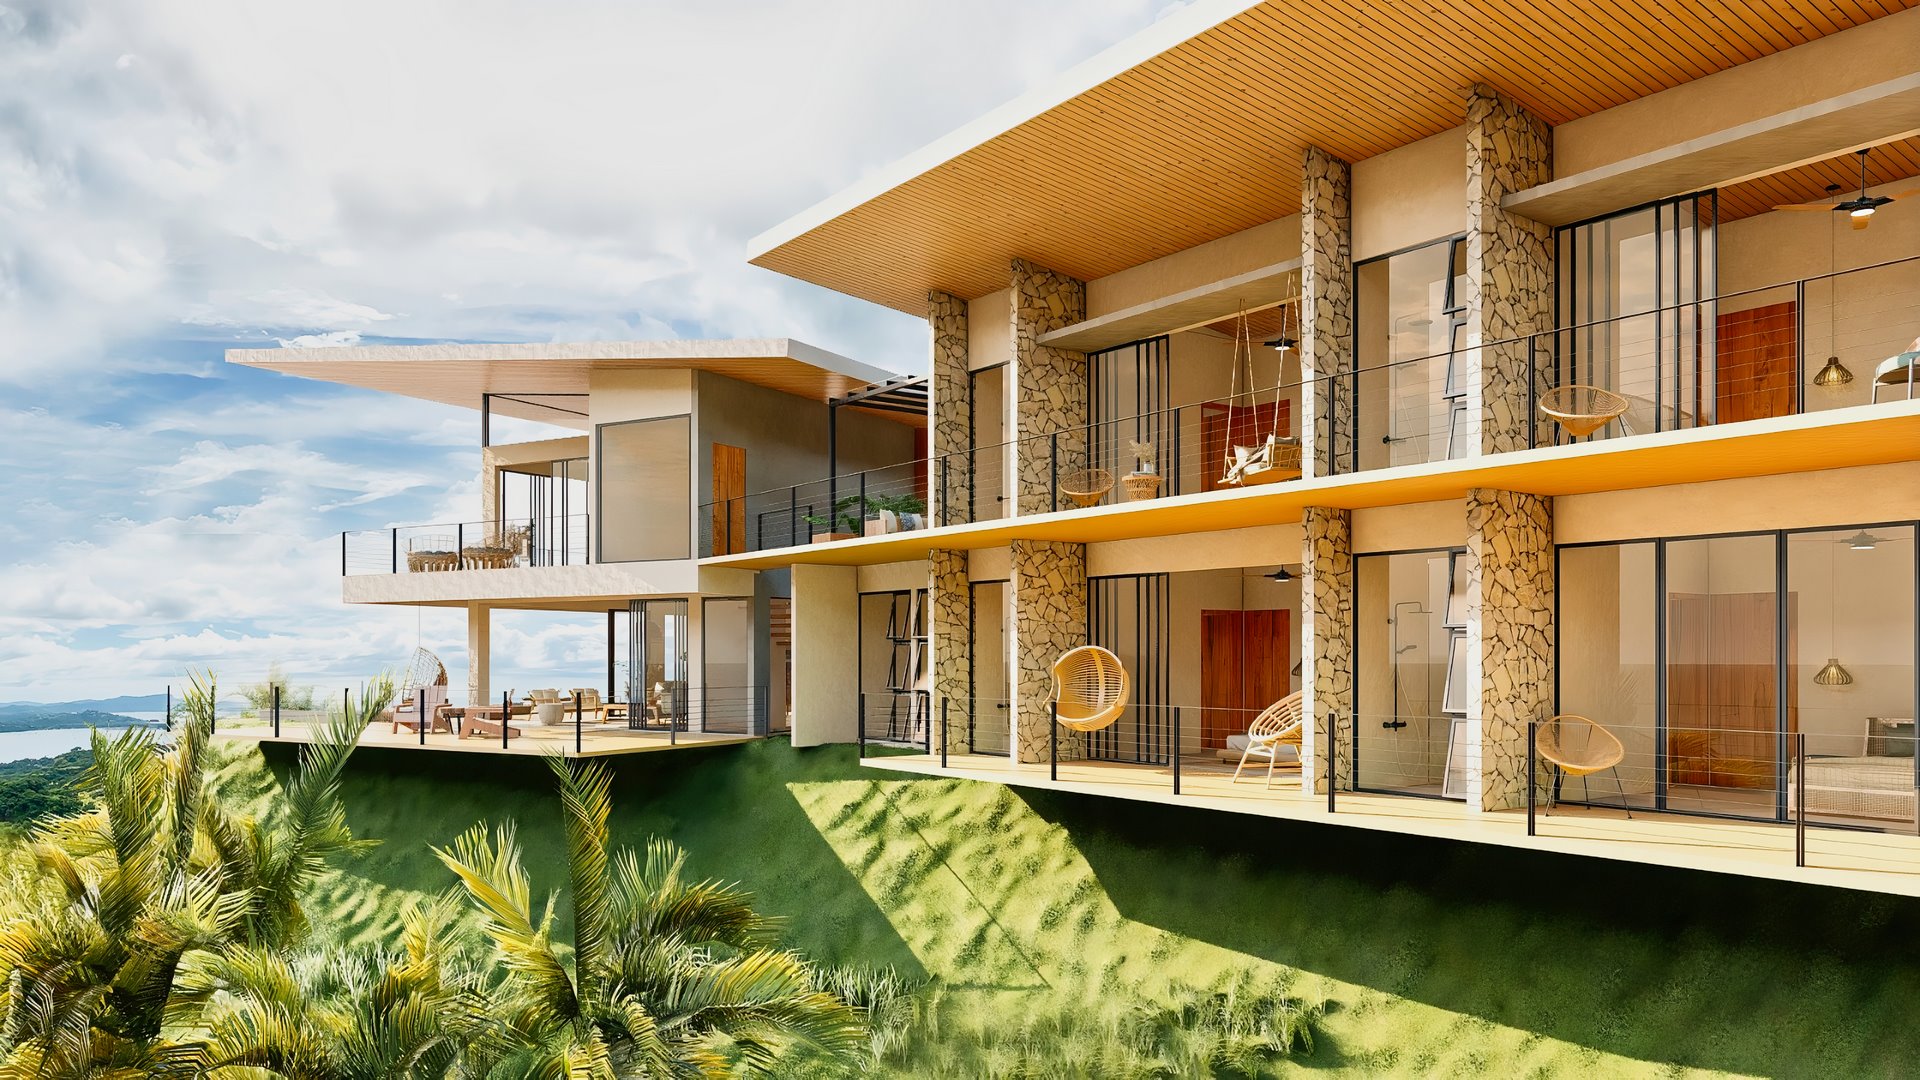 10458-The brand new home in Potrero with panoramic ocean views